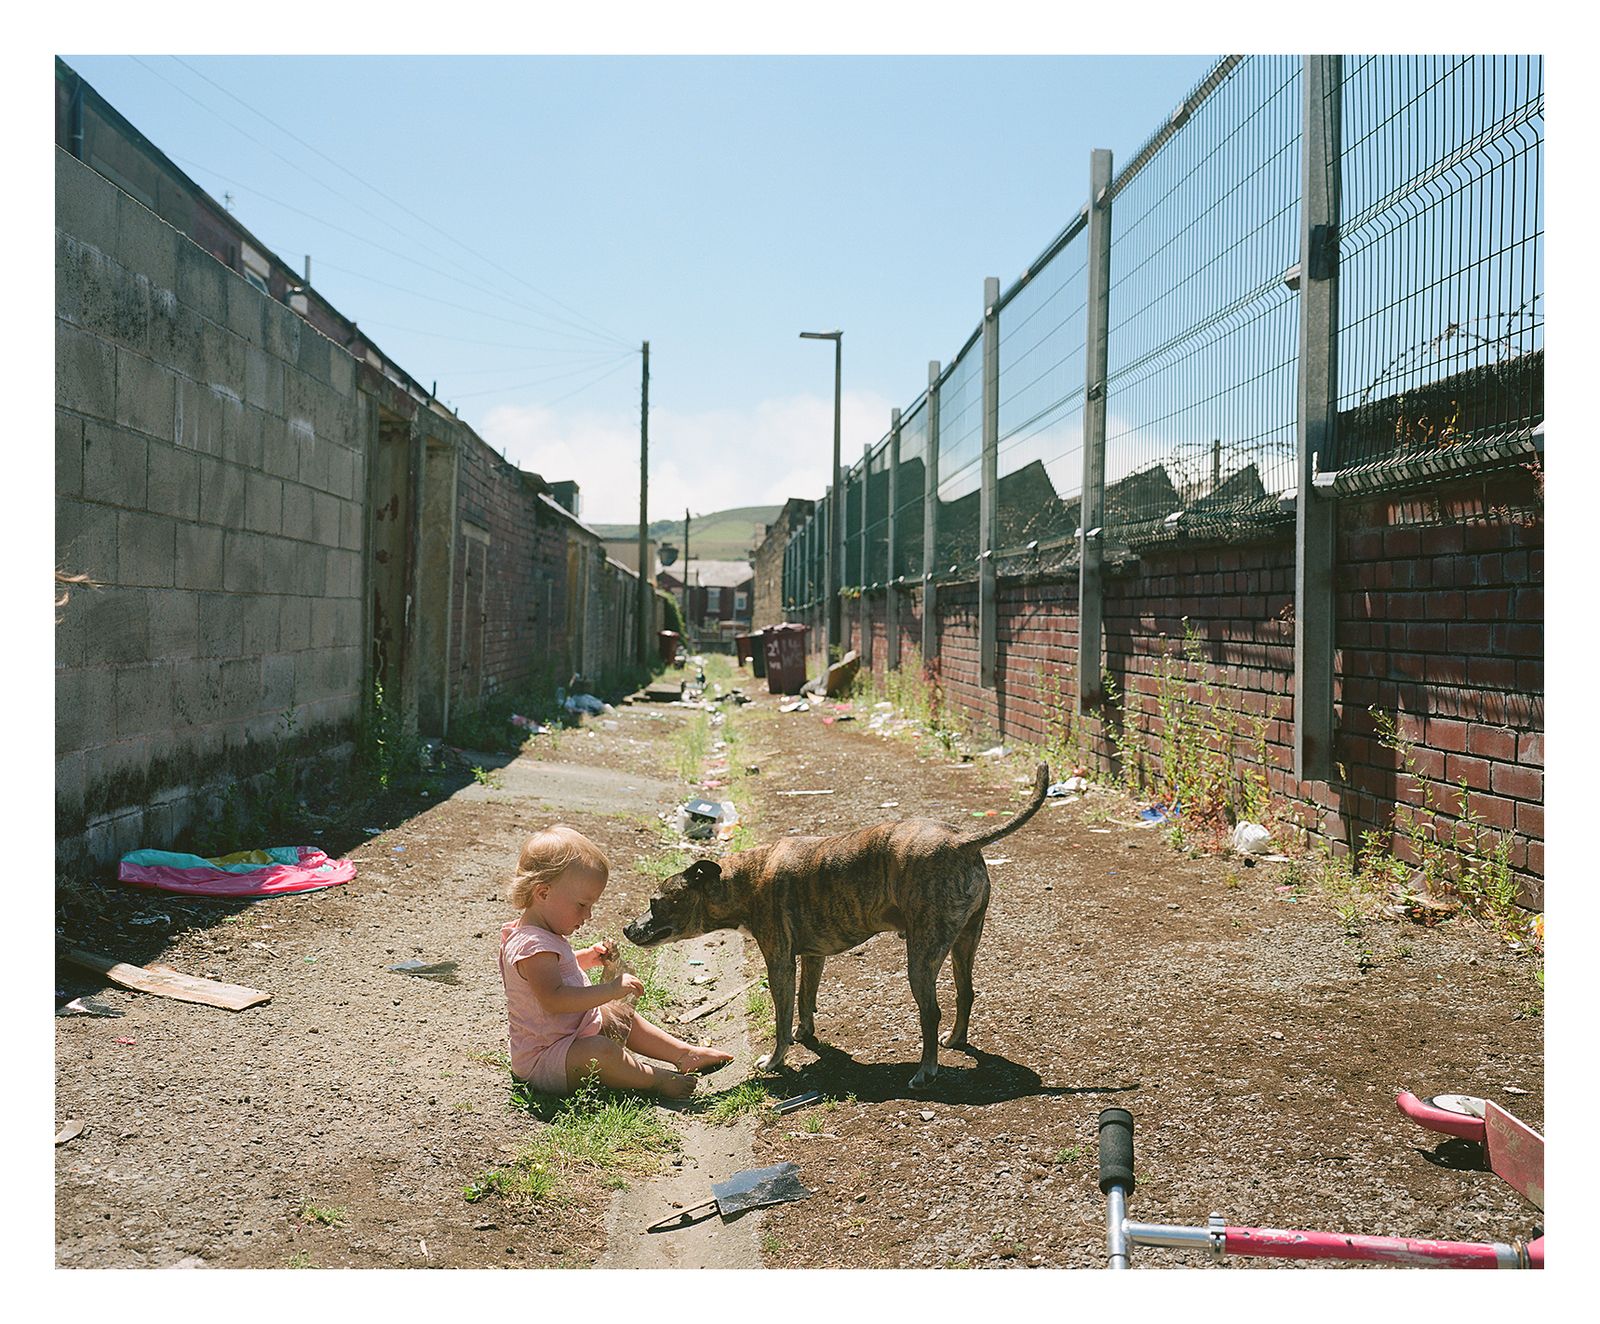 © Craig Easton - Image from the Thatcher's Children photography project